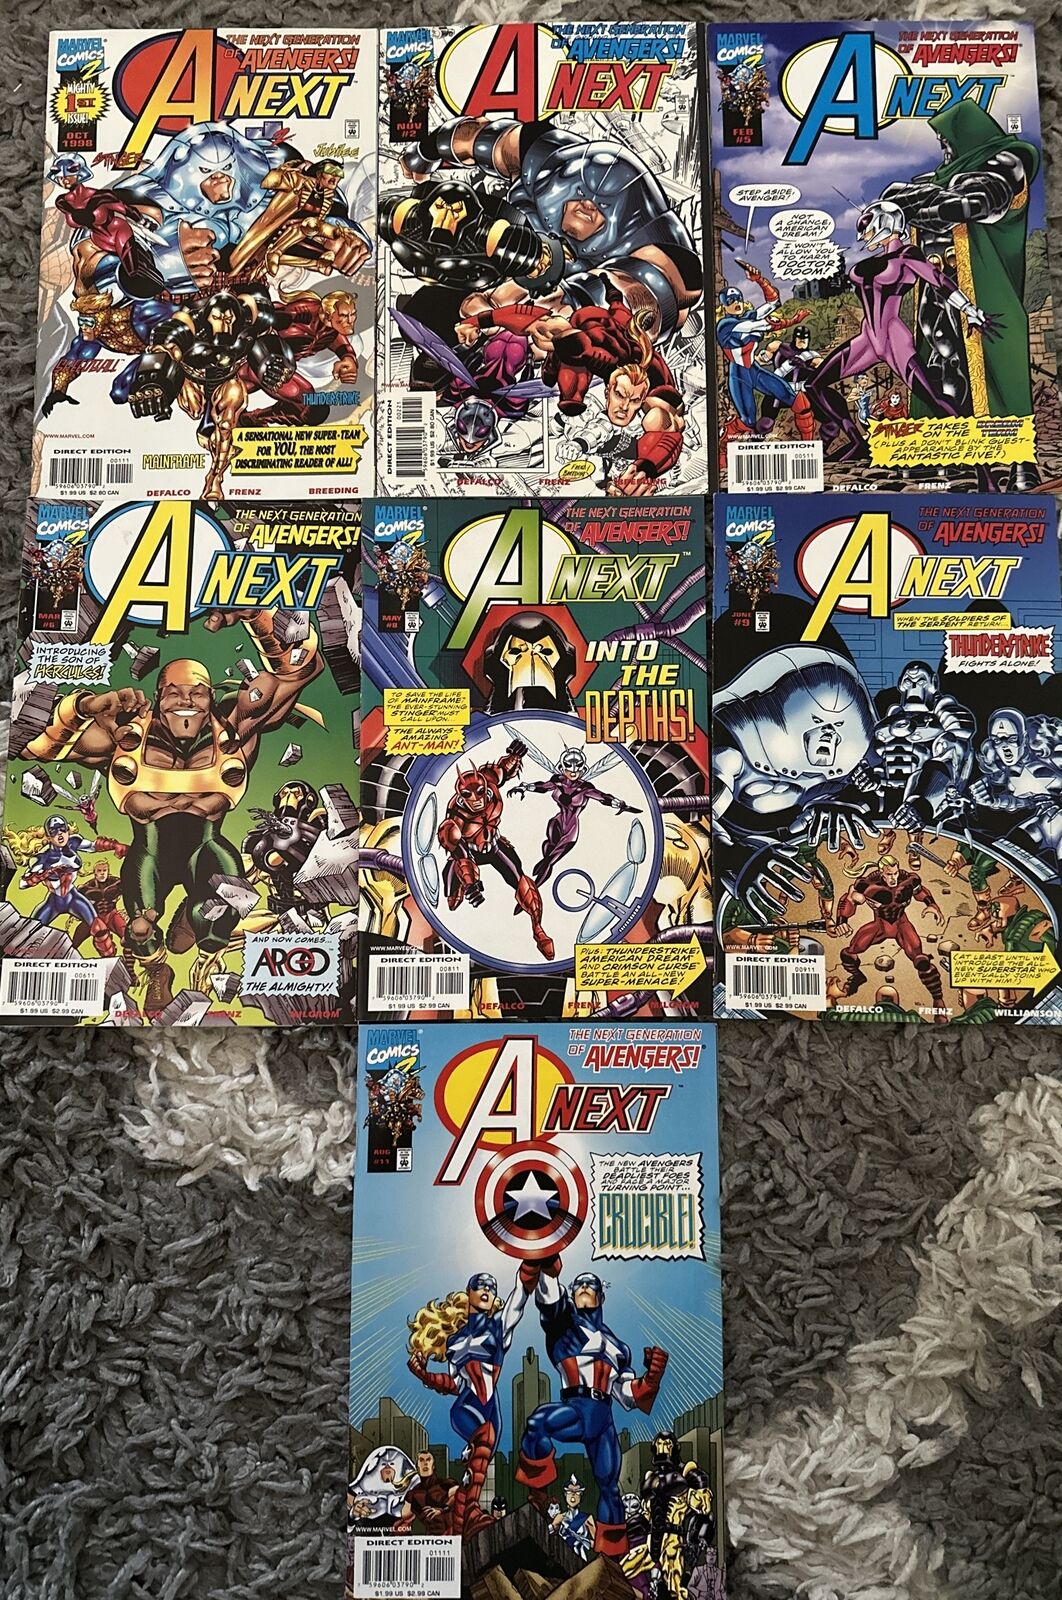 Avengers Lot 5, 7 Books, A-Next, 1st Issue + Team Appearance, 1st Earth Sentry